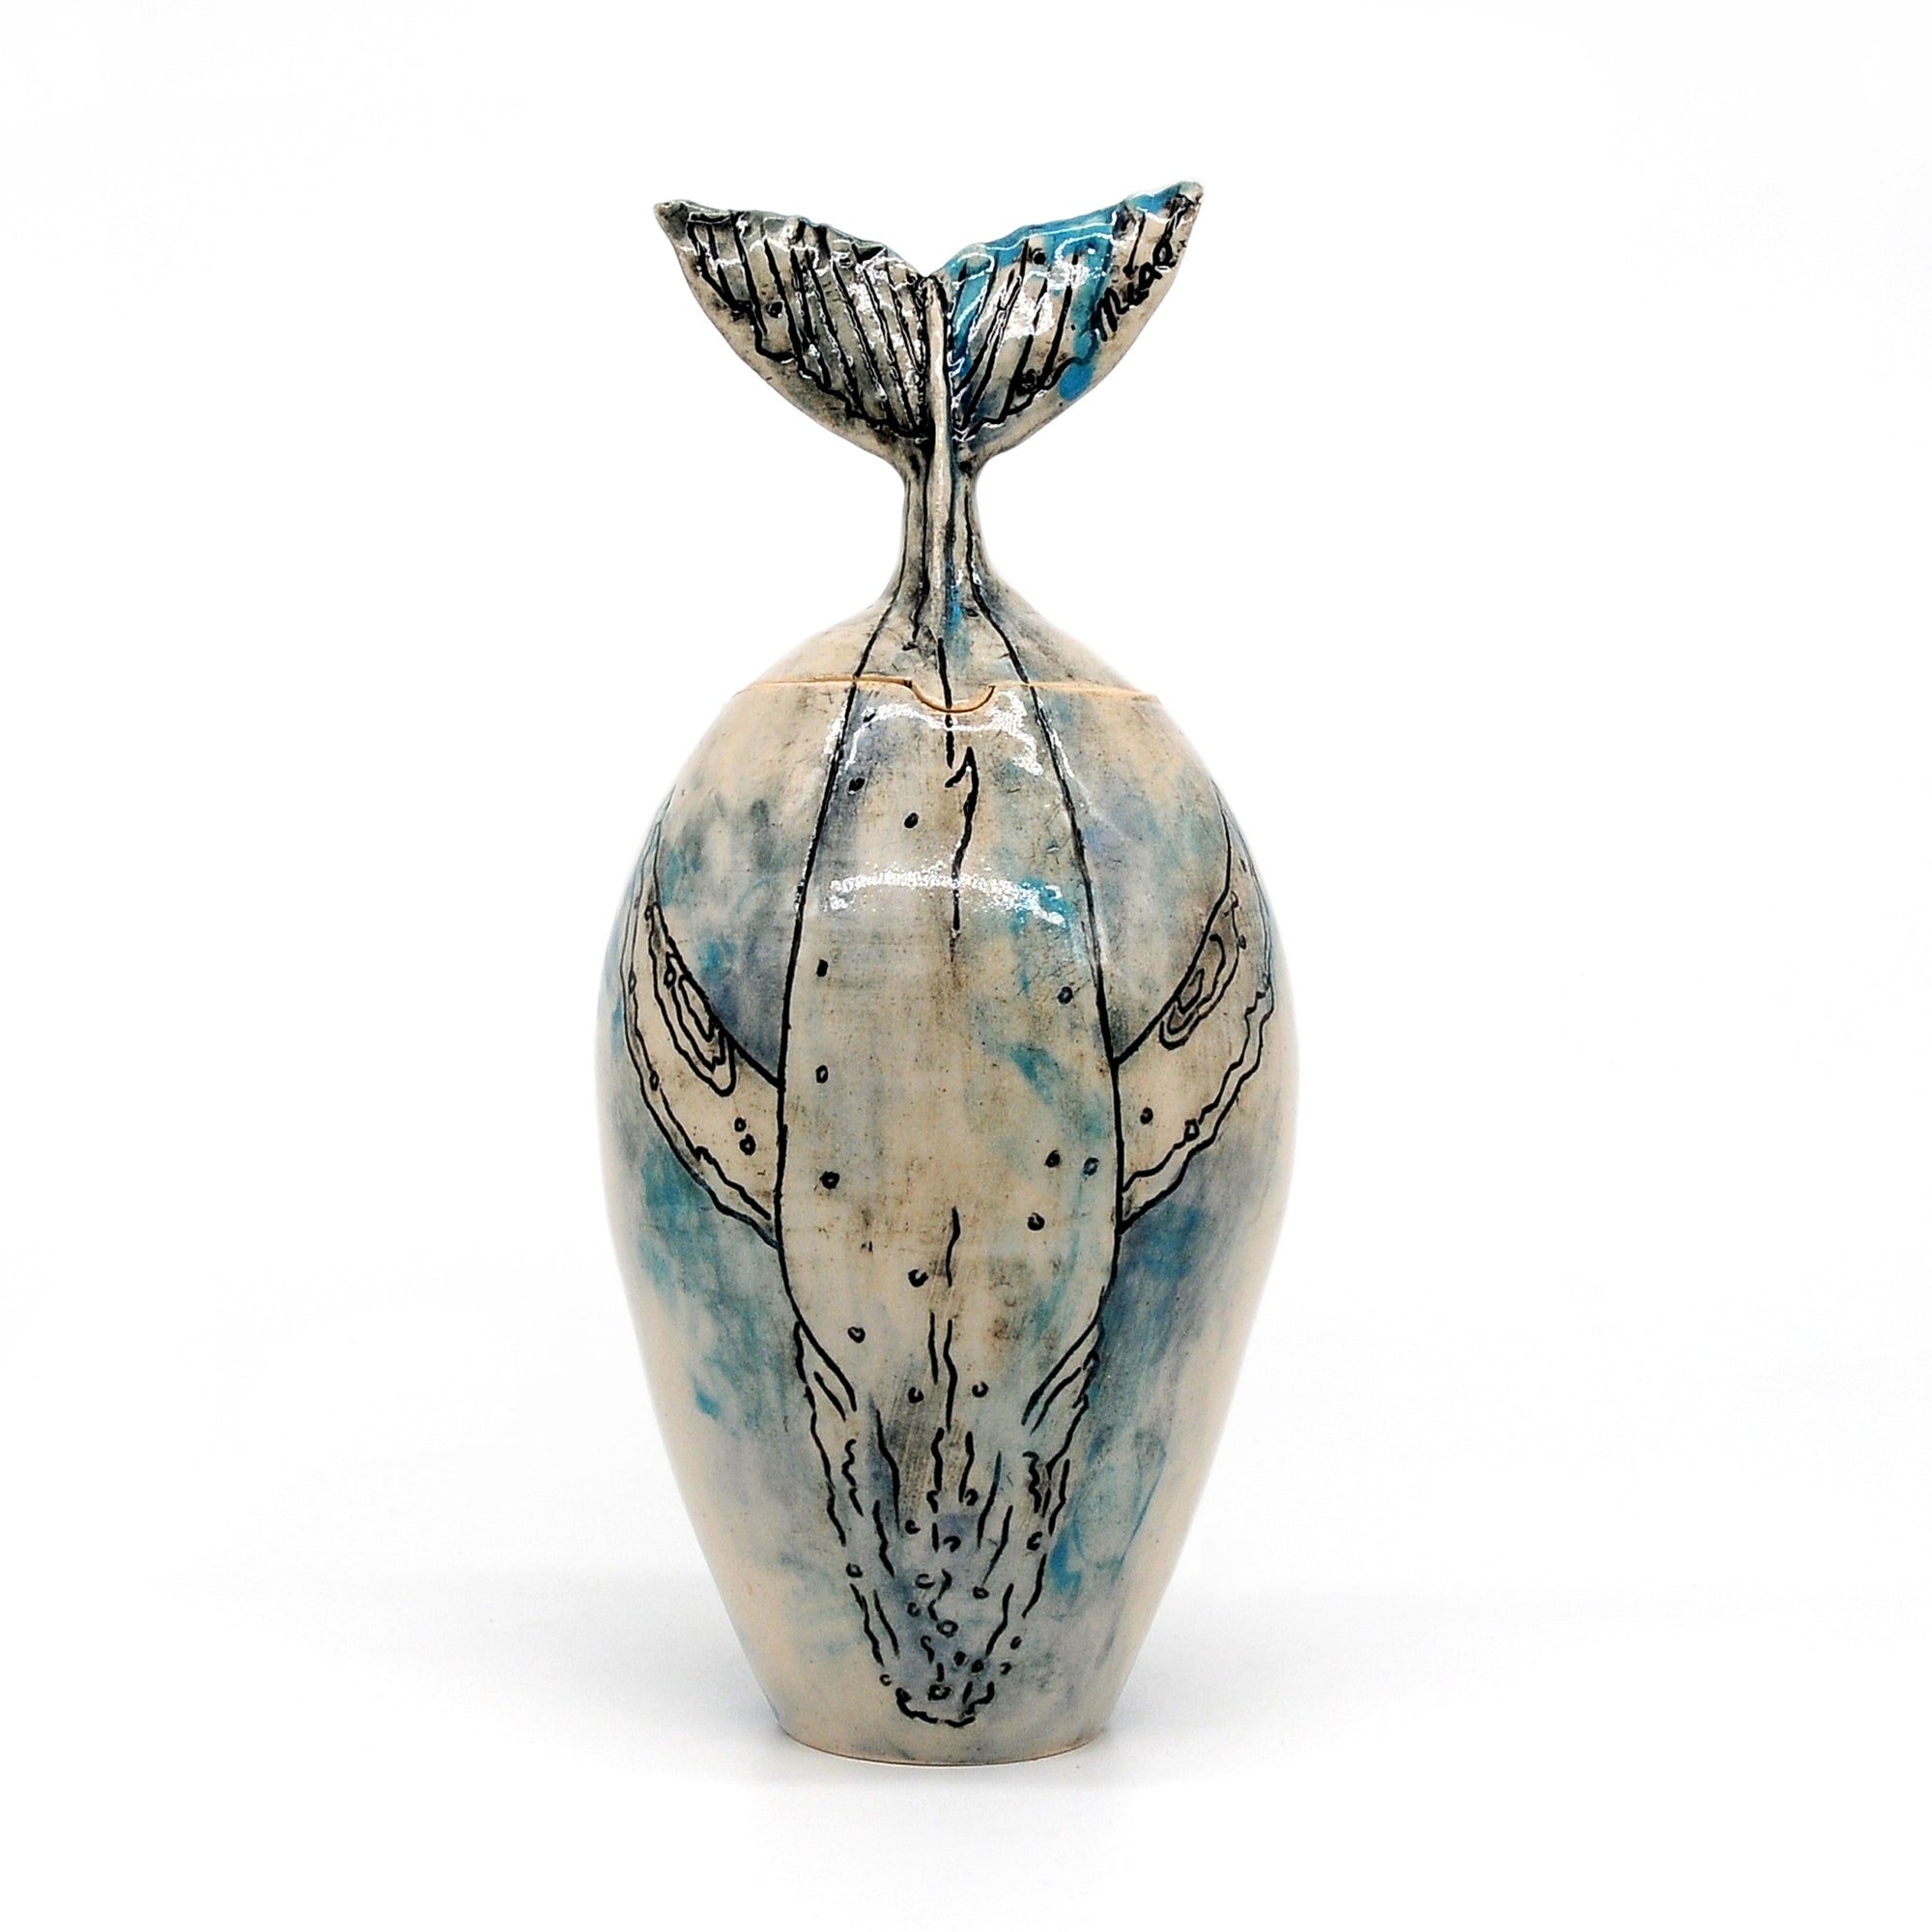 'MK21 Whale’ by Miae Kim ceramics, available at Padstow Gallery, Cornwall